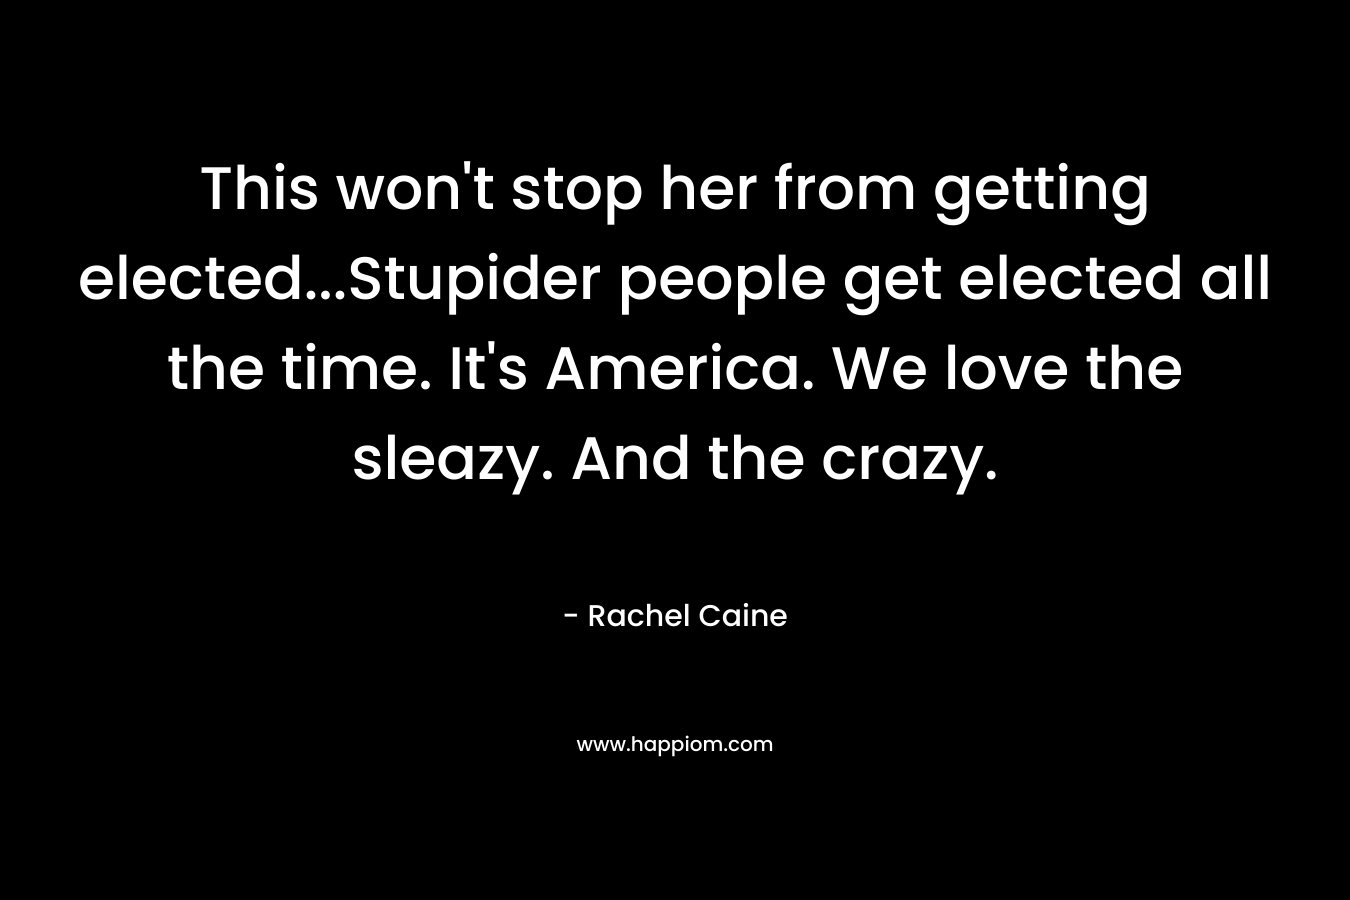 This won't stop her from getting elected...Stupider people get elected all the time. It's America. We love the sleazy. And the crazy.